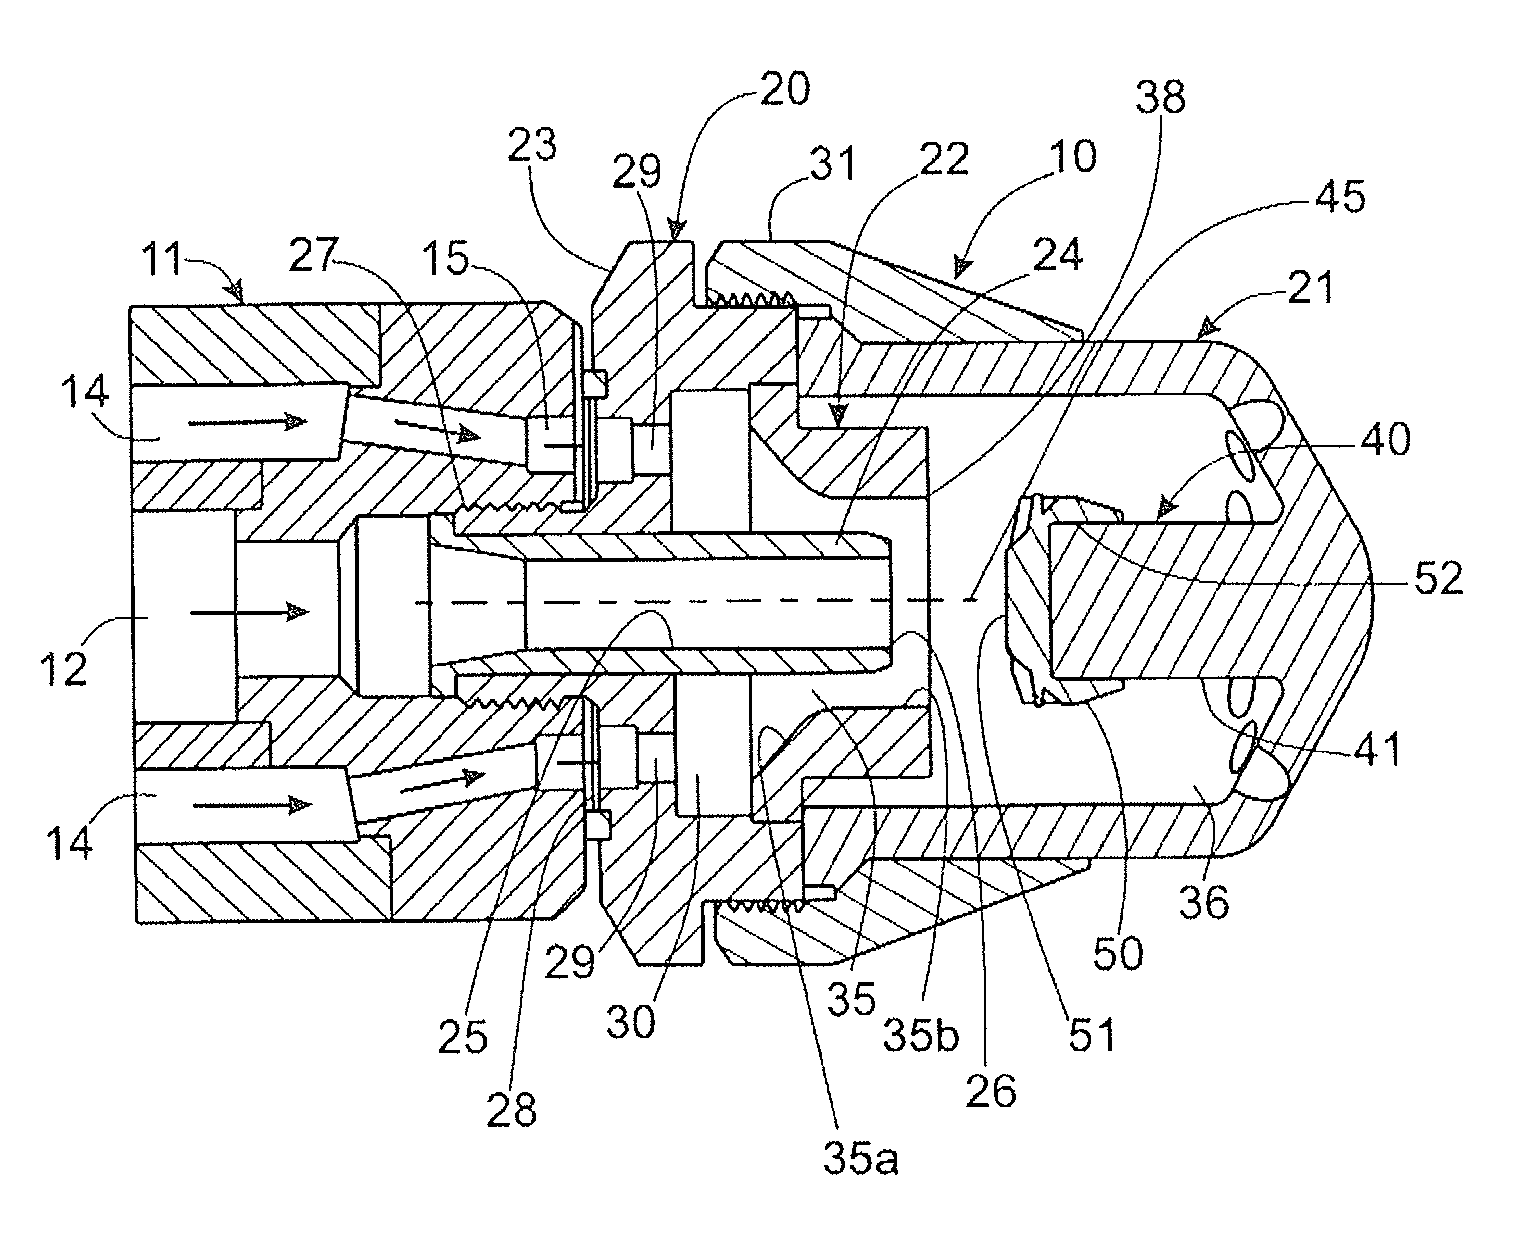 Spray nozzle assembly with impingement post-diffuser